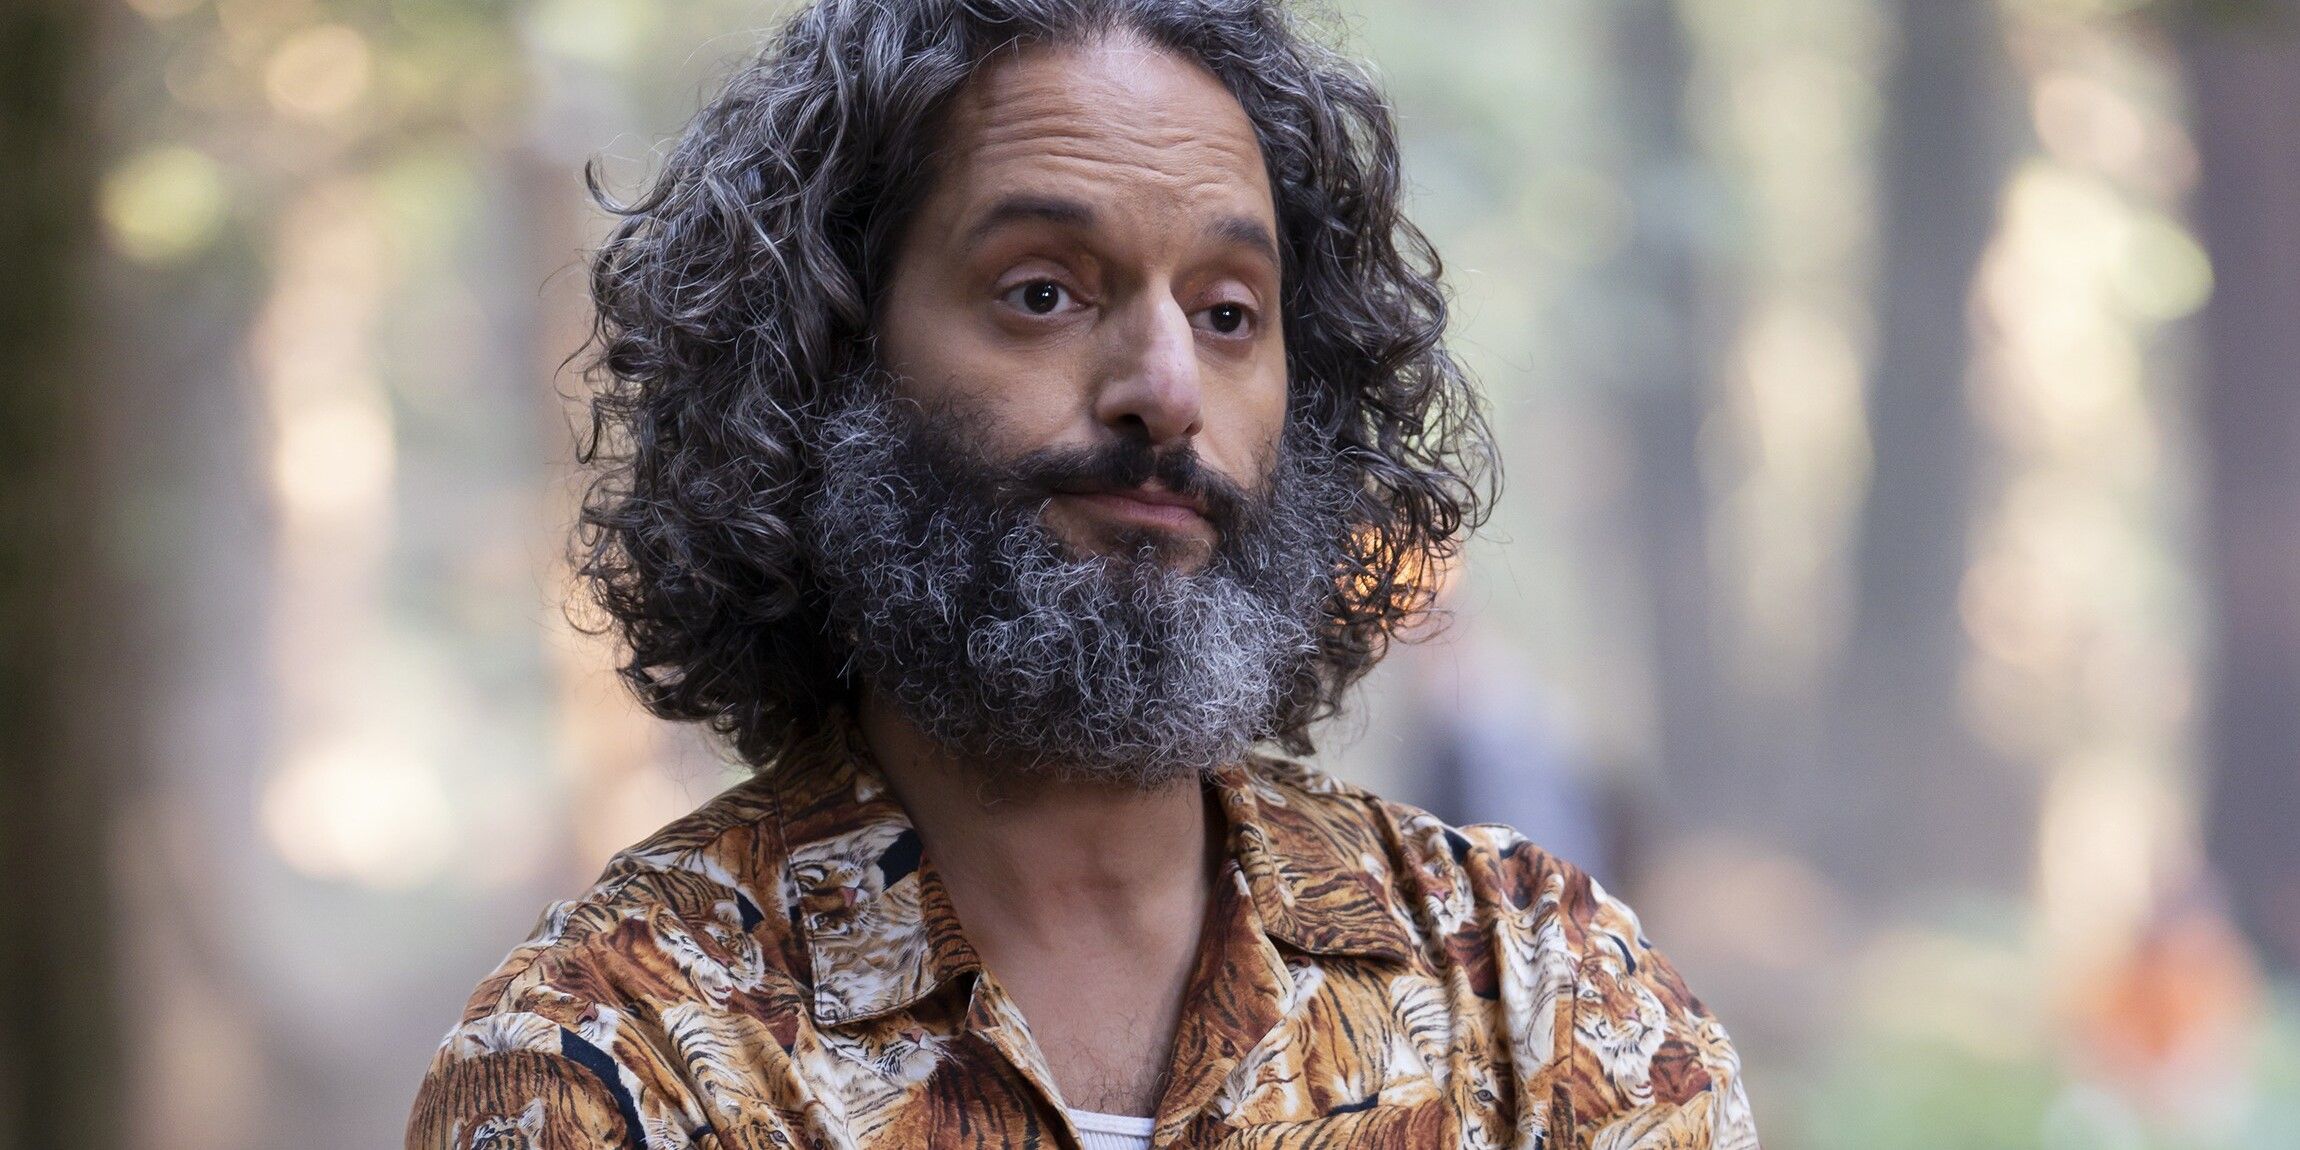 Jason Mantzoukas as Dionysus looking annoyed in Disney's Percy Jackson and the Olympians